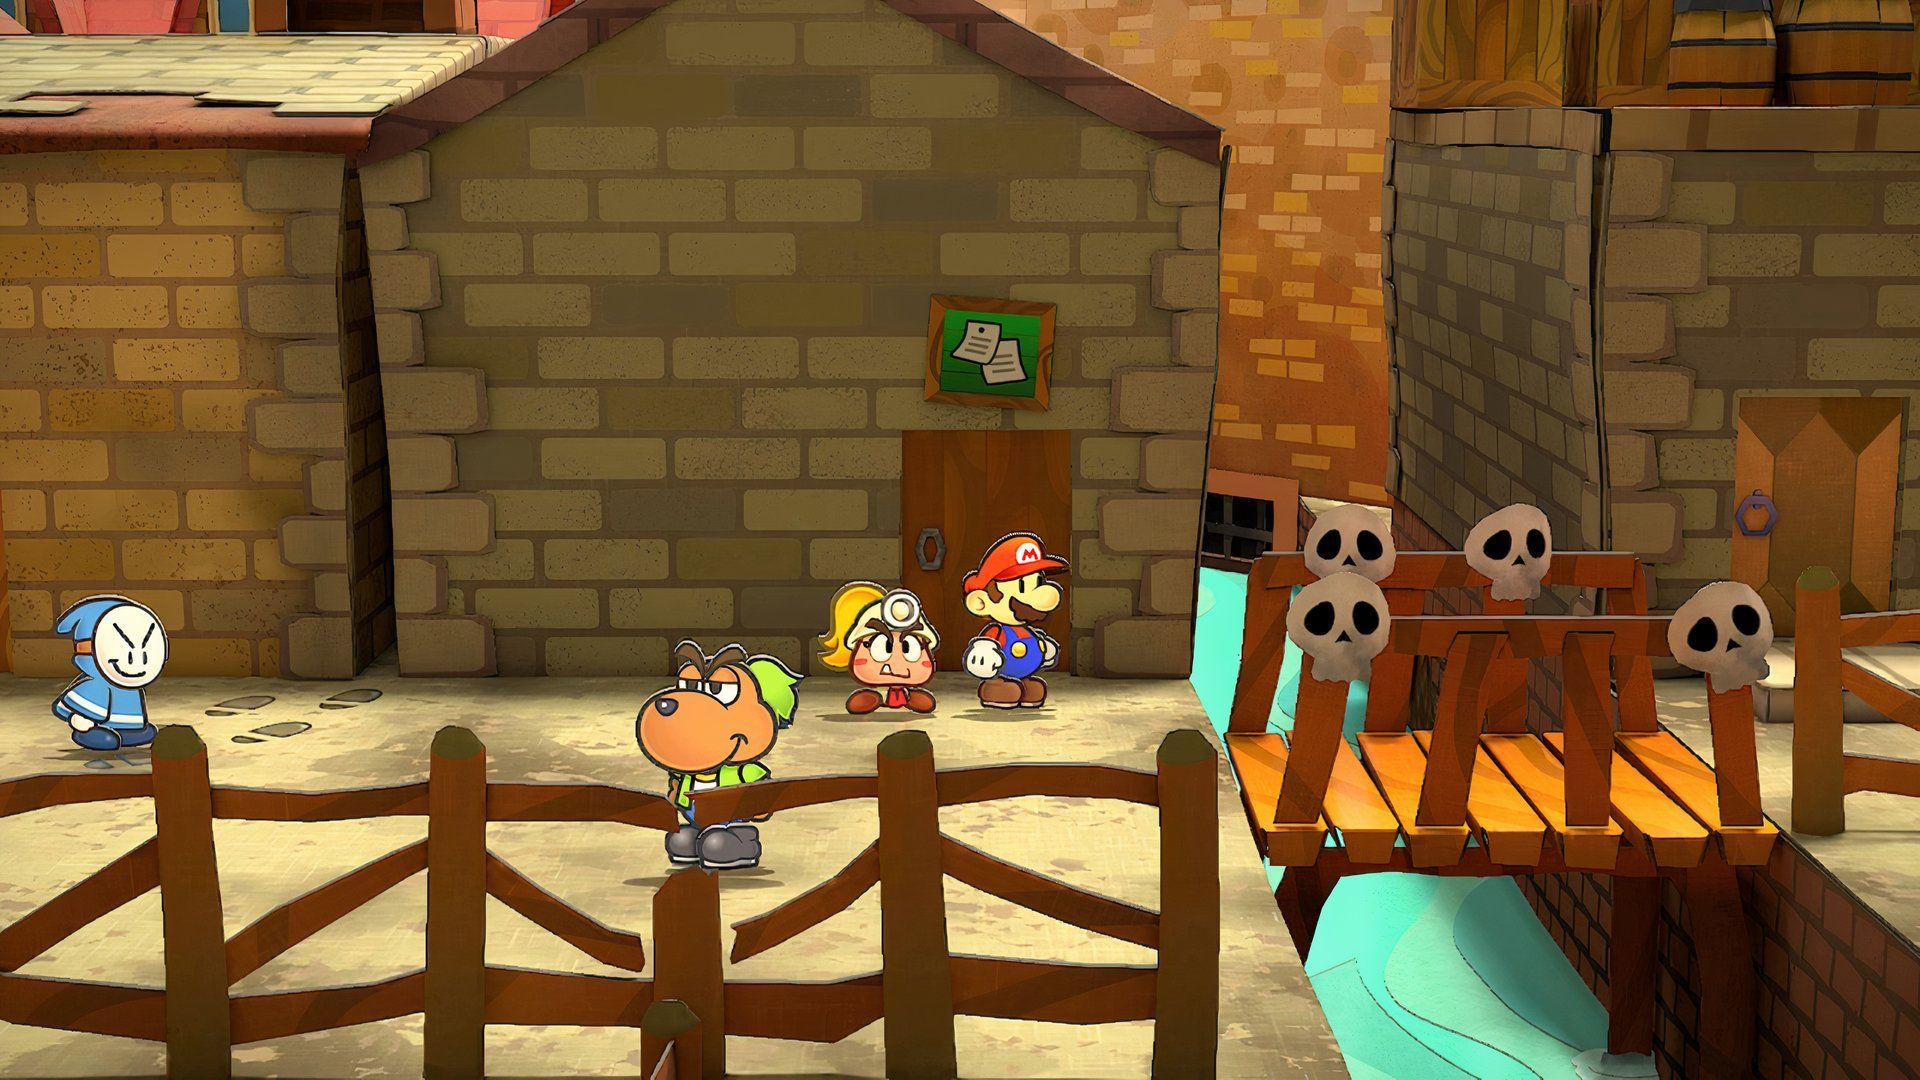 Paper Mario: The Thousand-Year Door - Mario Outside the Trouble Center